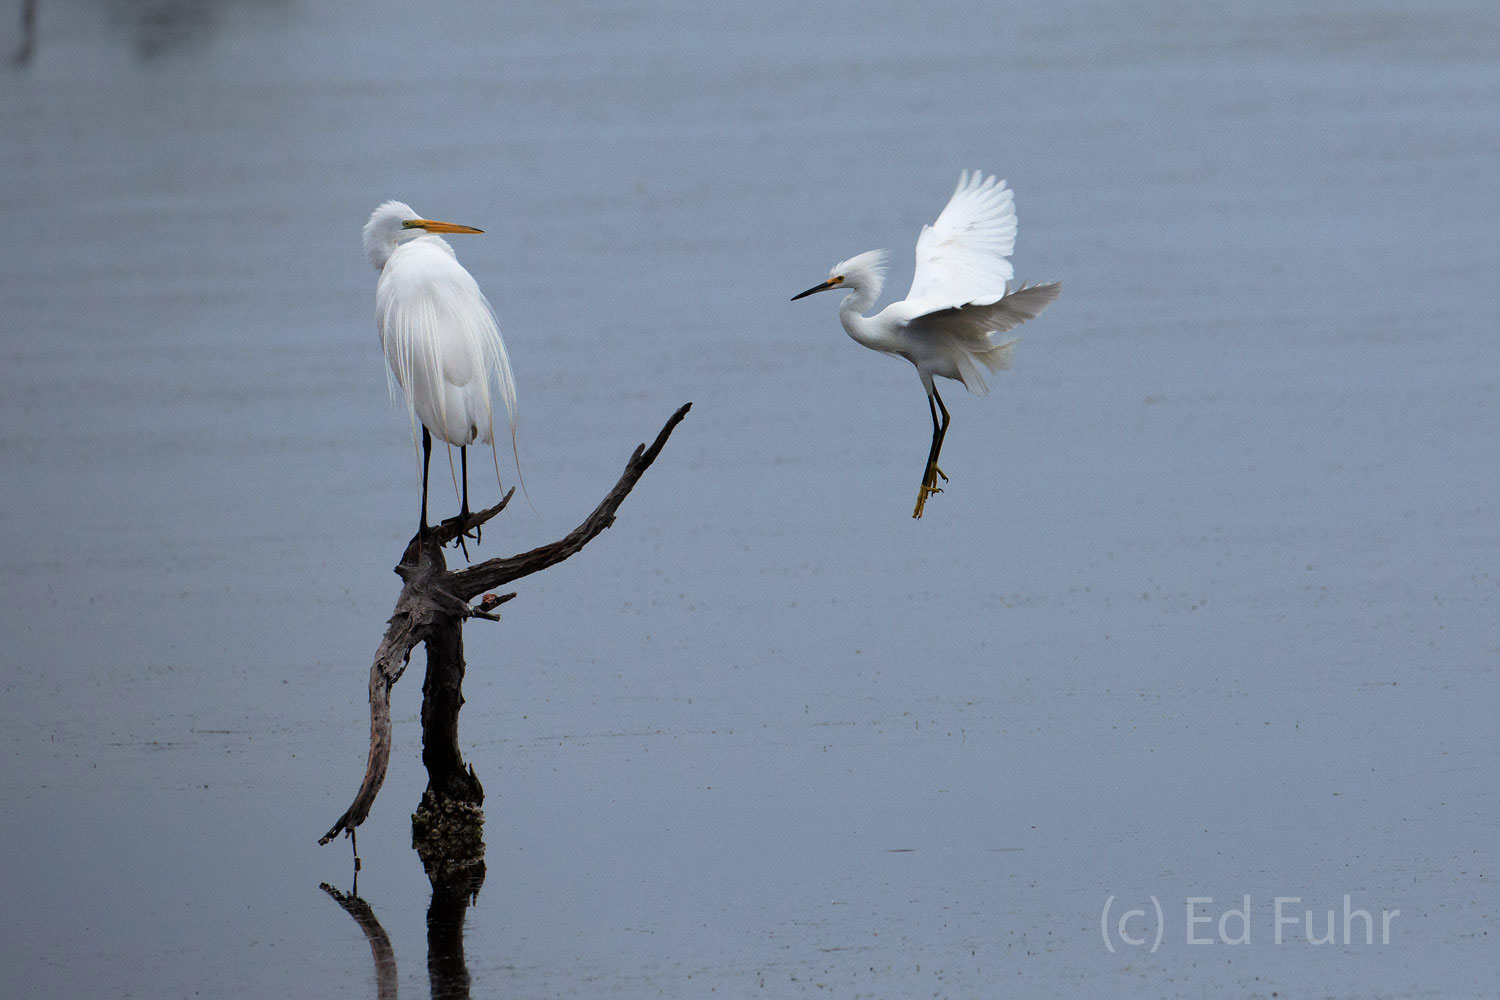 A snowy egret tries without success to get this great white egret to abandon its perch.